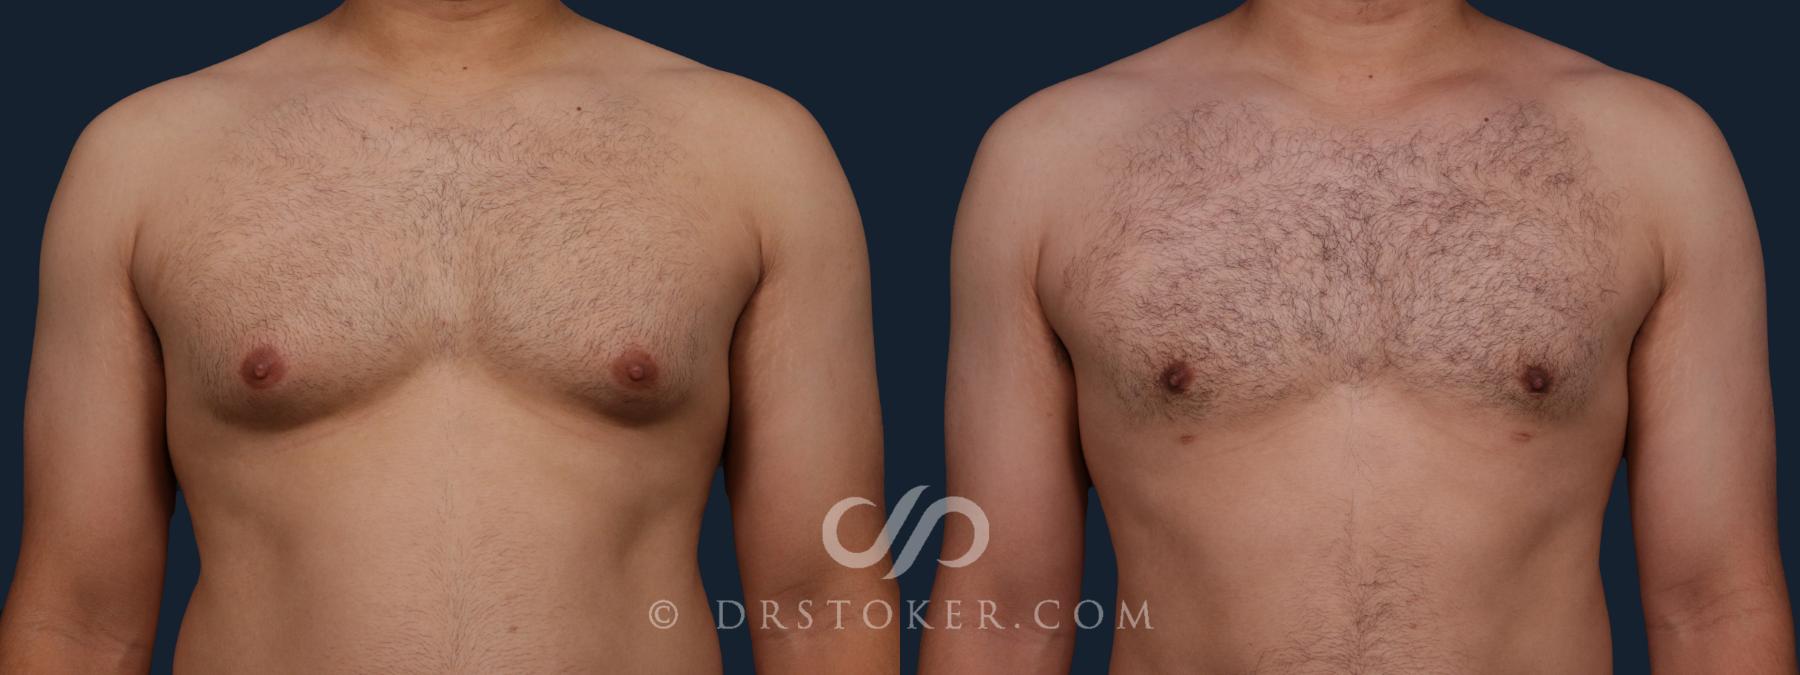 Before & After Breast Reduction for Men (Gynecomastia) Case 2177 Front View in Los Angeles, CA